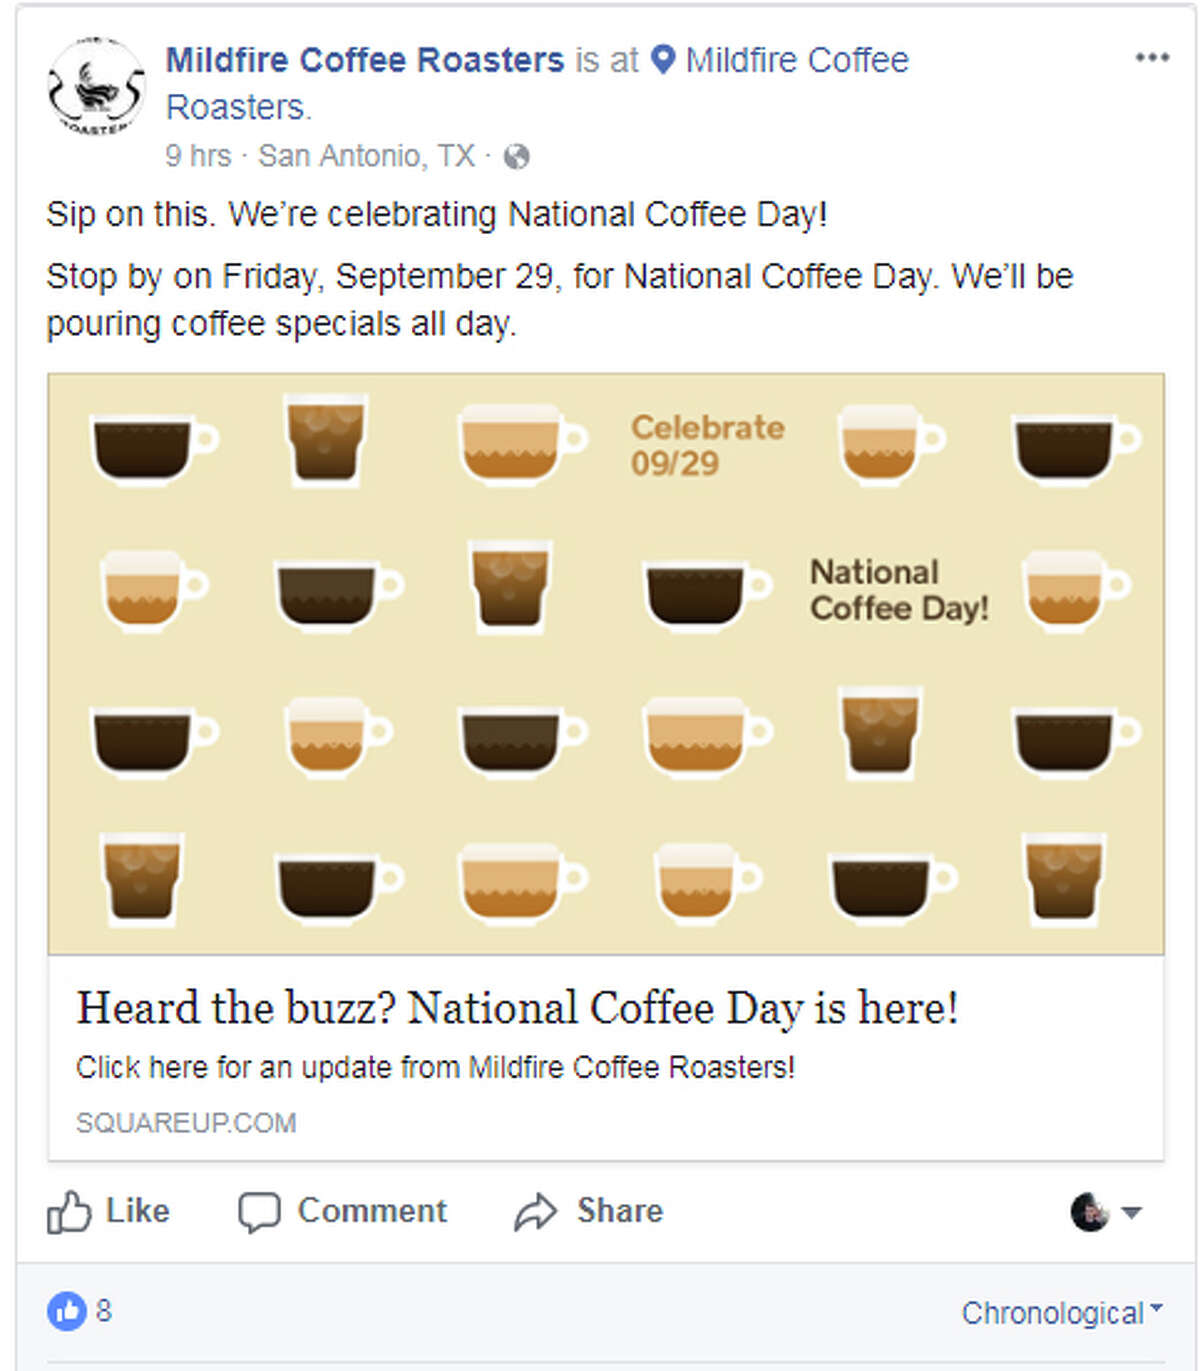 Mildfire Coffee Roasters: 15502 Huebner Rd Ste 101National Coffee Day deals throughout the day.